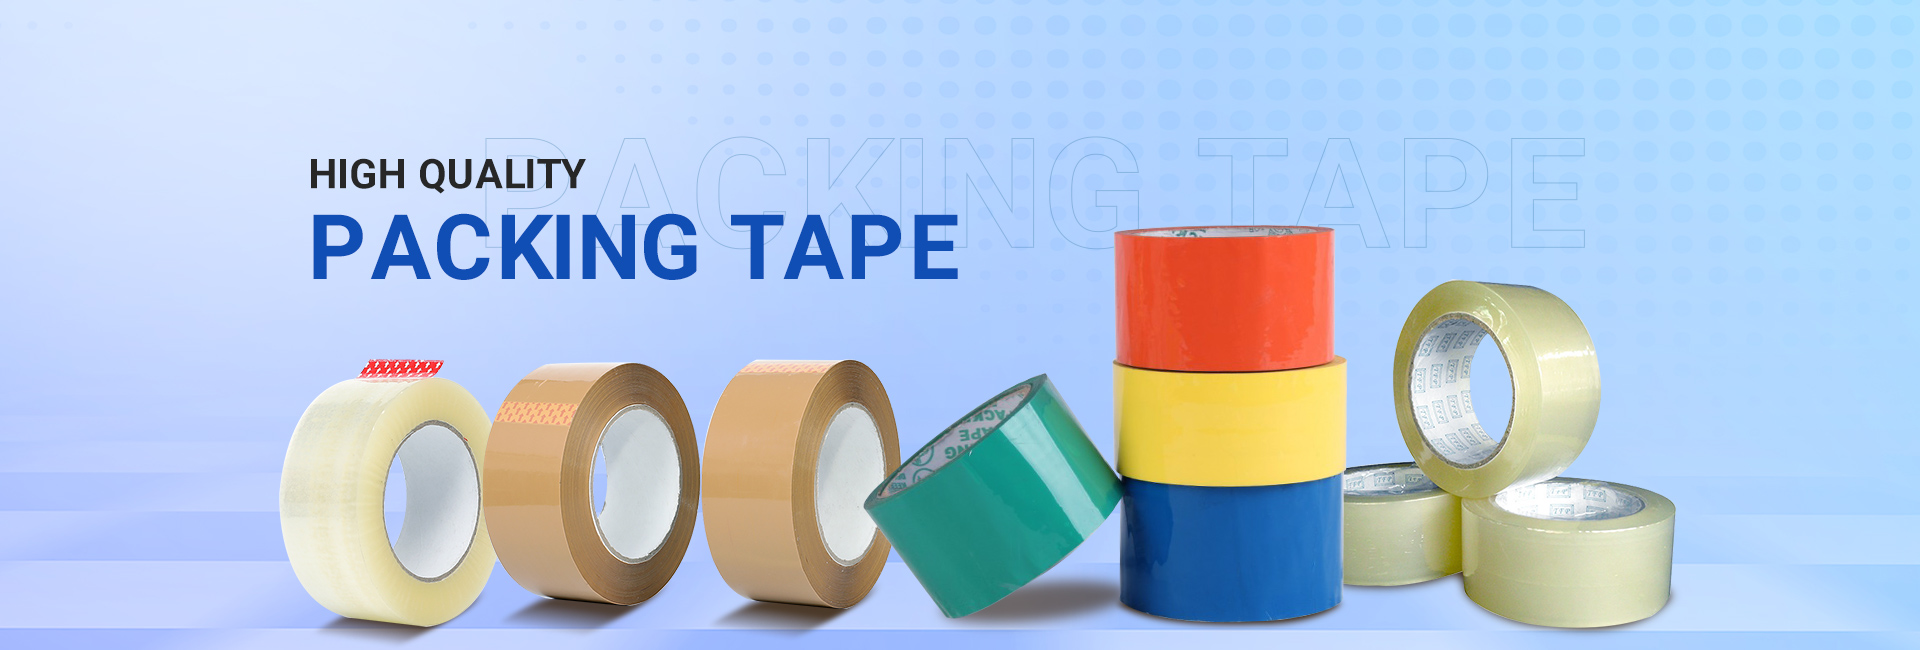 CLEAR PACKING TAPE